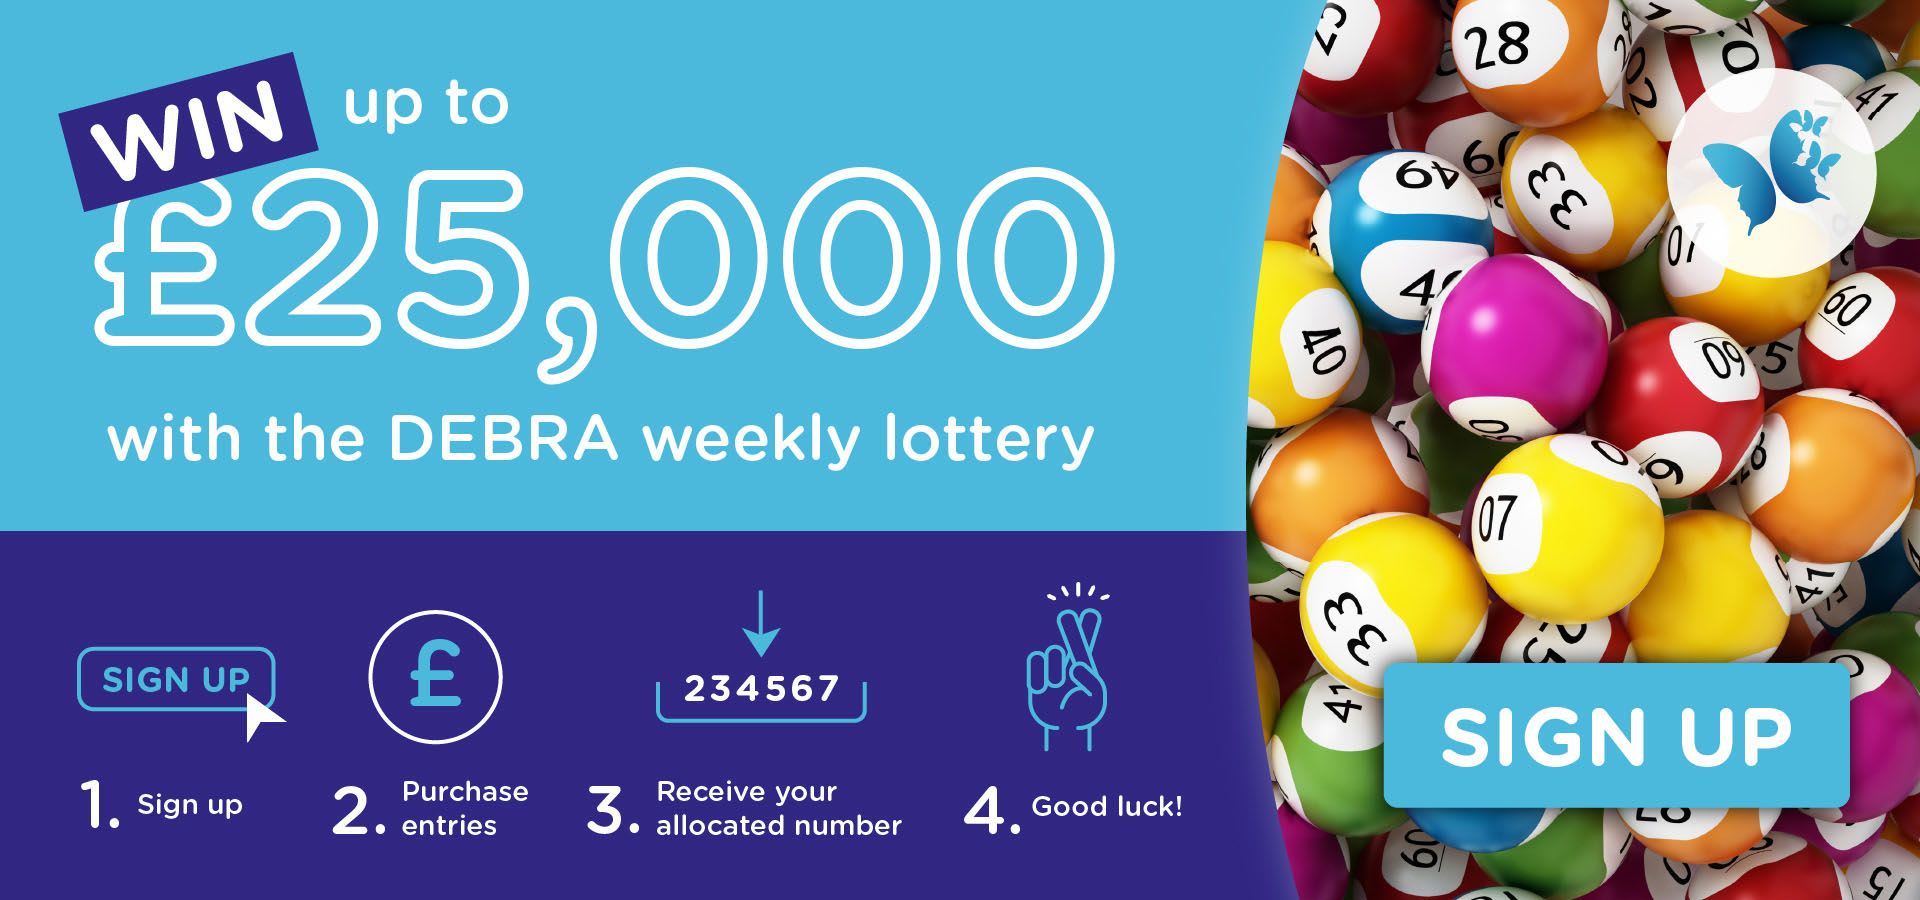 Banner with an image of lottery balls and the text: win up to £25,000 with the DEBRA weekly lottery. Sign up.